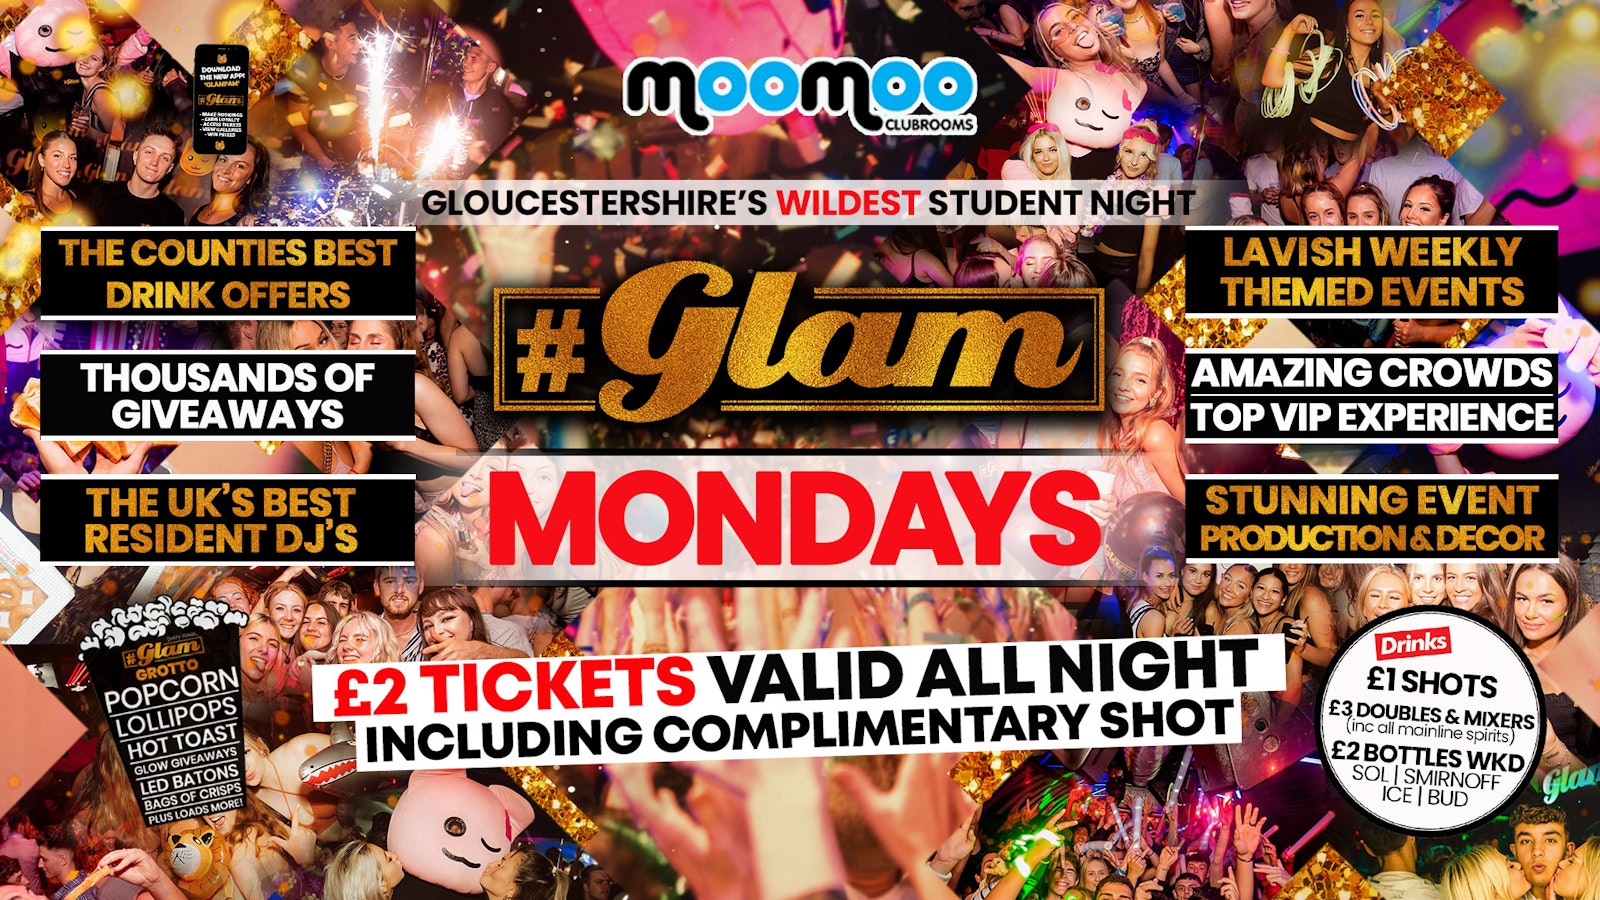 Glam – Gloucestershire’s Biggest Monday Night 😻 £2 TICKETS WITH SHOT VALID ALL NIGHT! 🐾